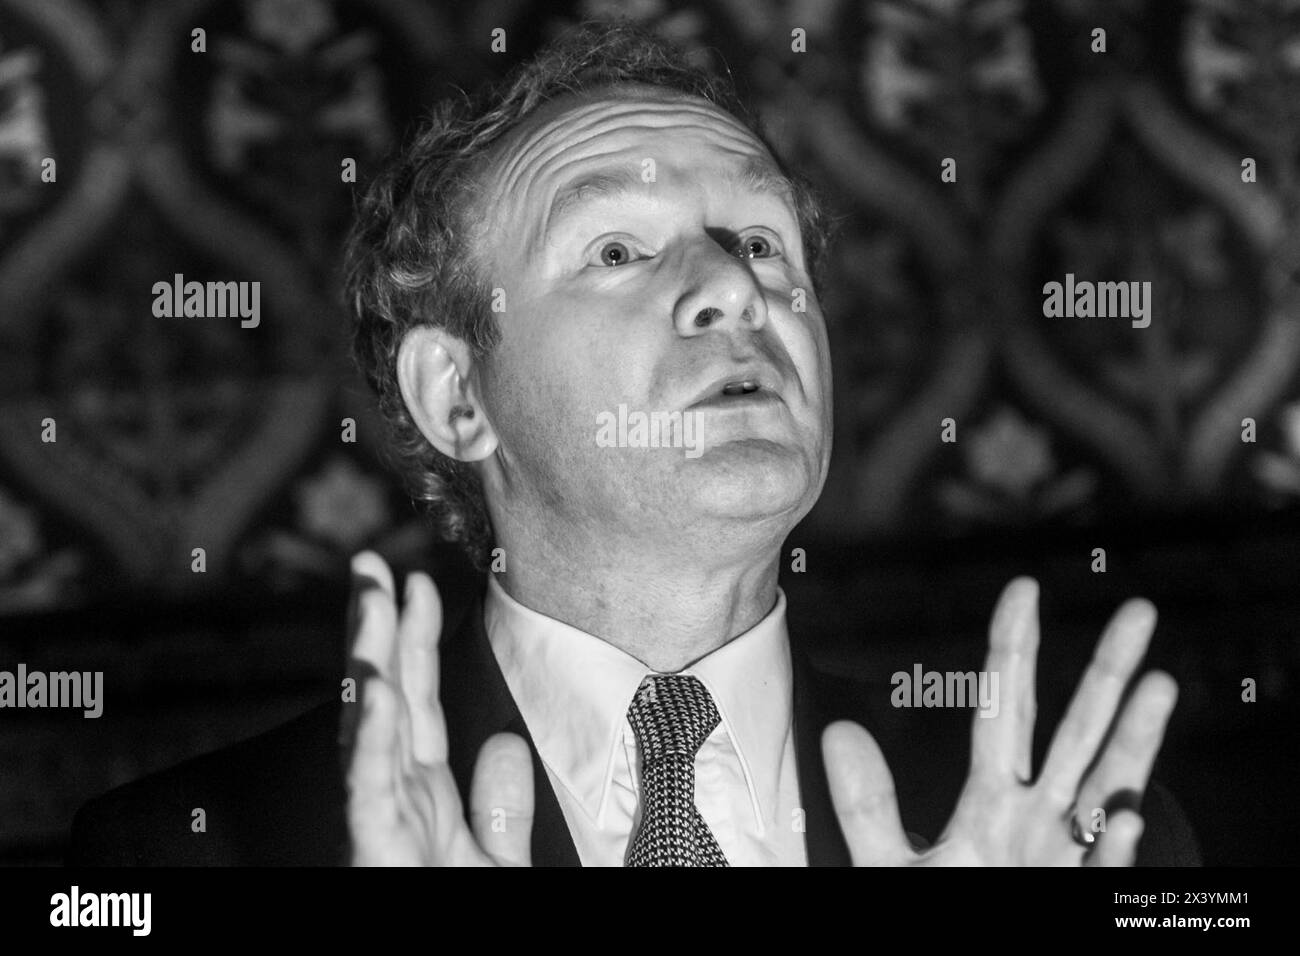 Martin McGuinness, politician who was a member of Sinn Fein, the political wing of the Irish Republican Party photographed at Westminster in the year 2000 Stock Photo